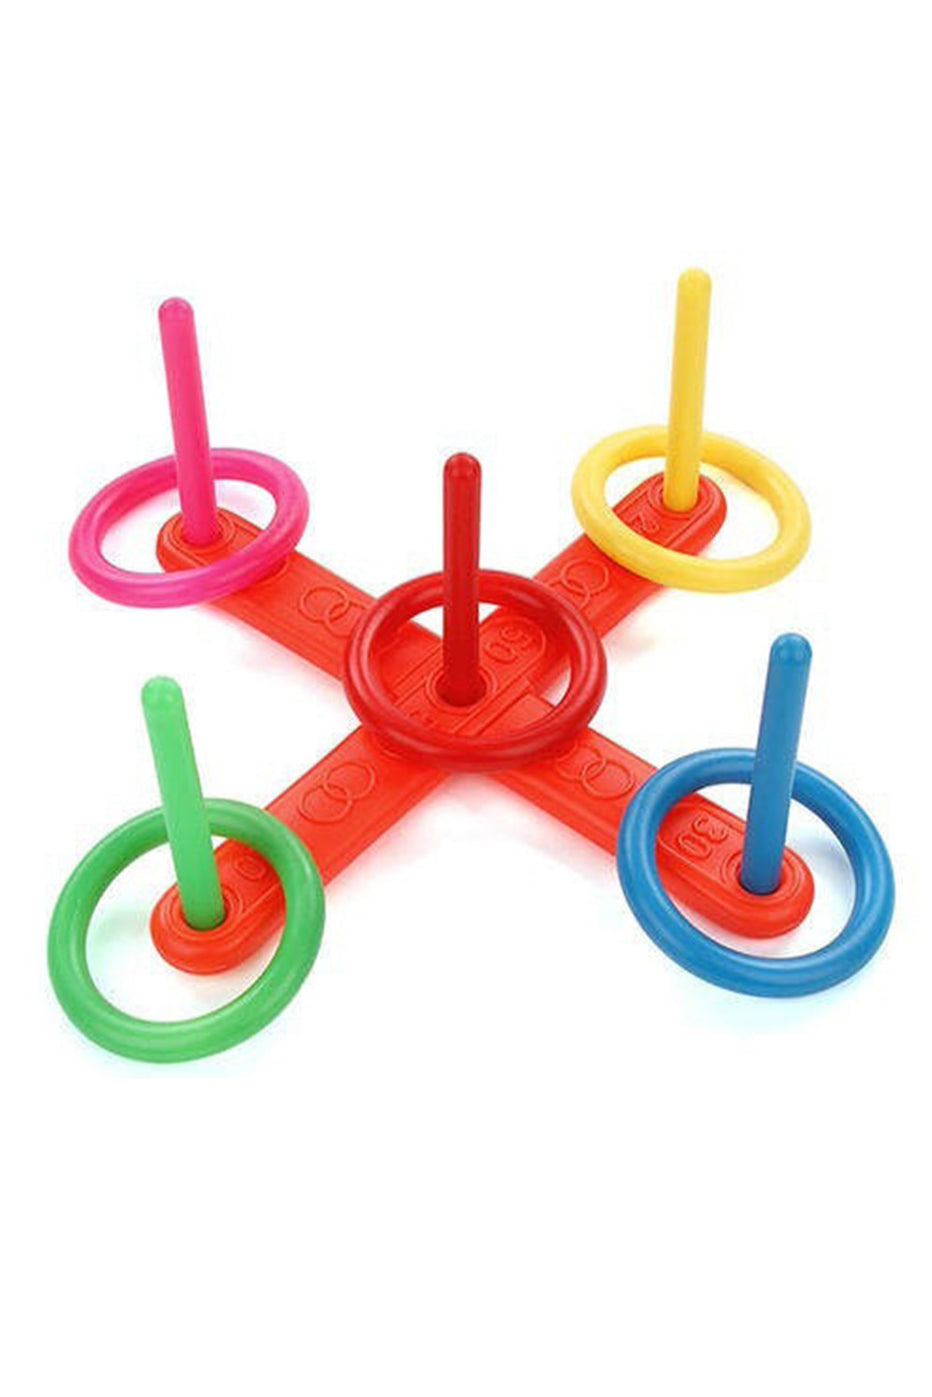 Amazon.com: GOODLYSPORTS 4 in 1 Ring Toss Game for Kids. Carnival Games for  Kids Party with Bean Bags for Tossing, Hopscotch, Ring Toss, Skip Ball.  Party Games for Kids, Outdoor Toys for